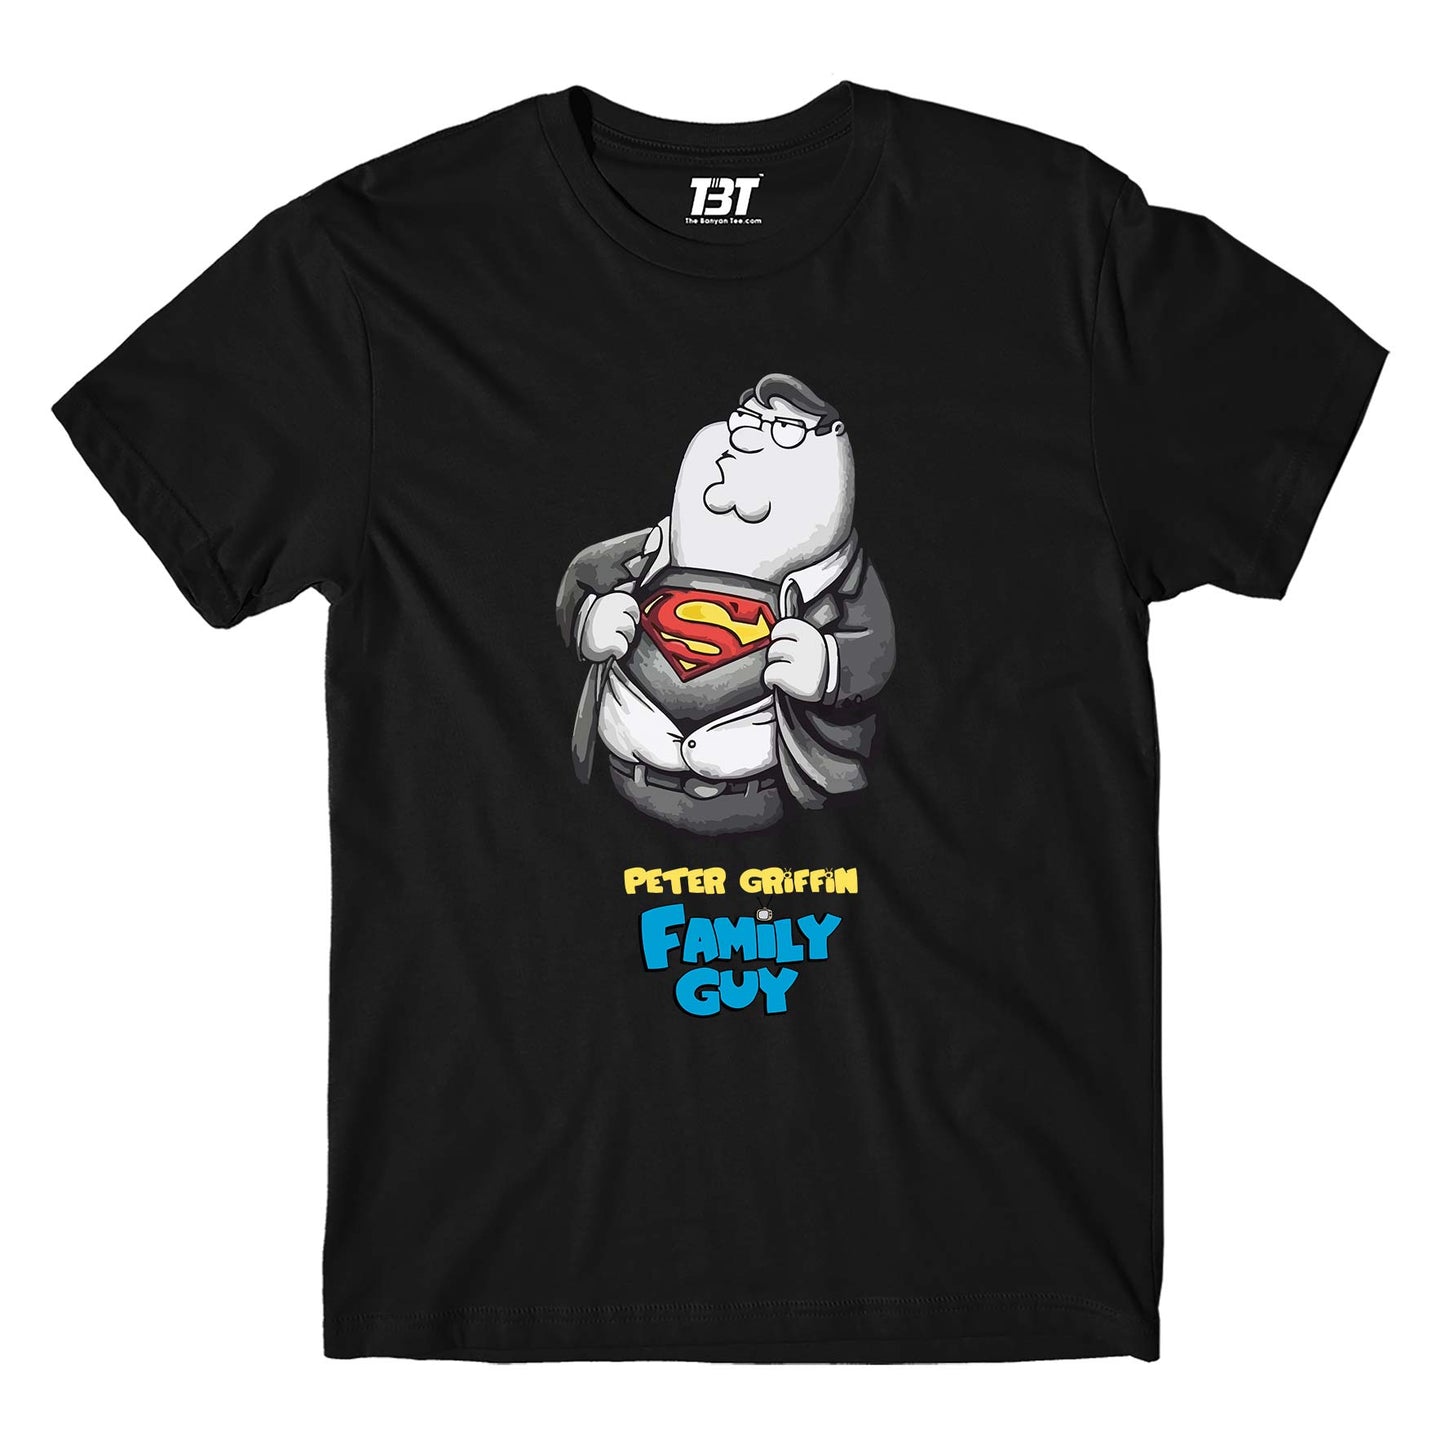 the banyan tee merch on sale Family Guy T shirt - On Sale - 6XL (Chest size 56 IN)